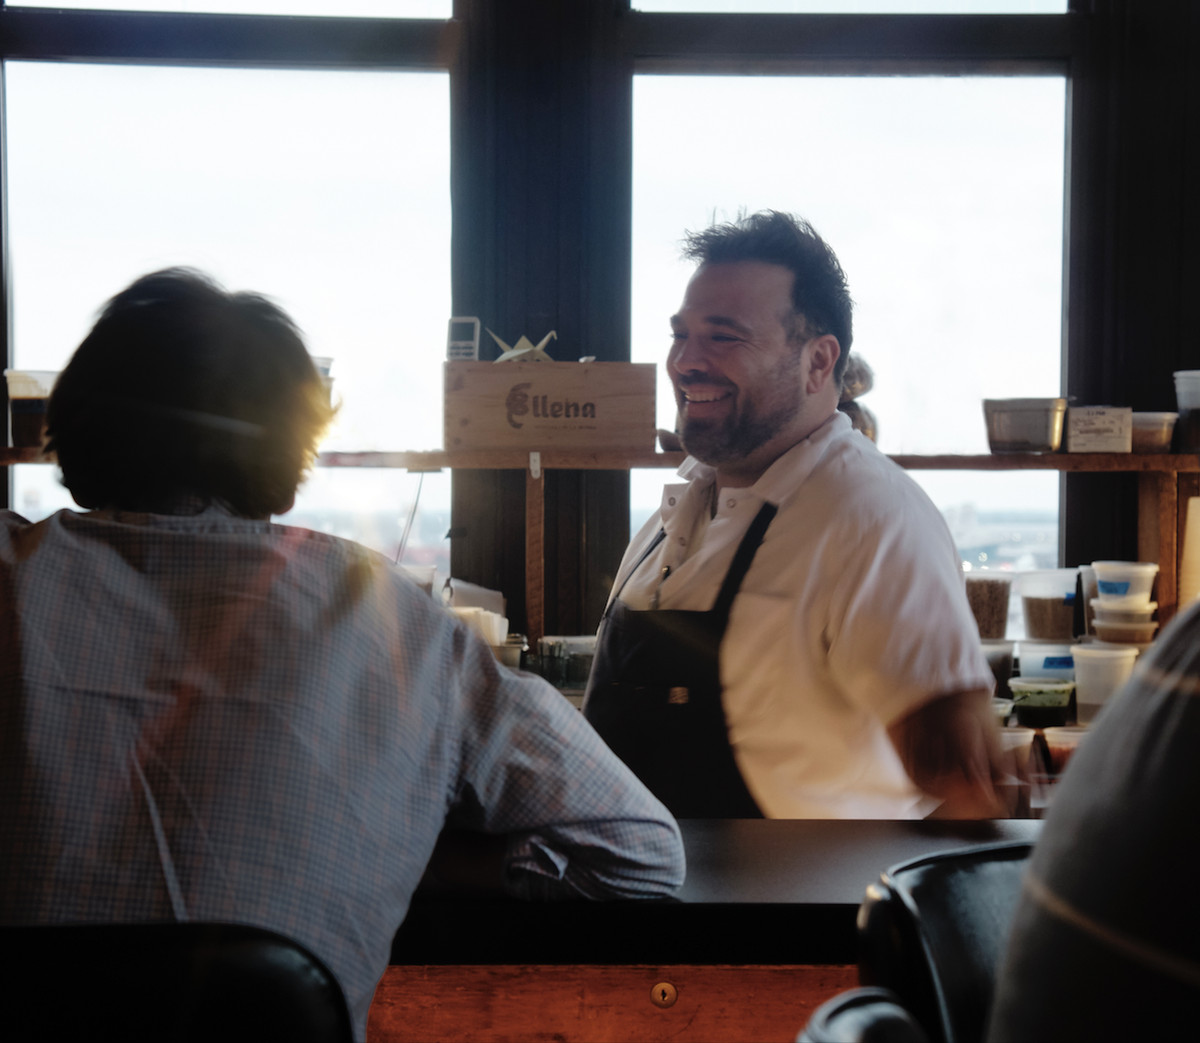 A chef speaking to a diner at a counter in the daytime.